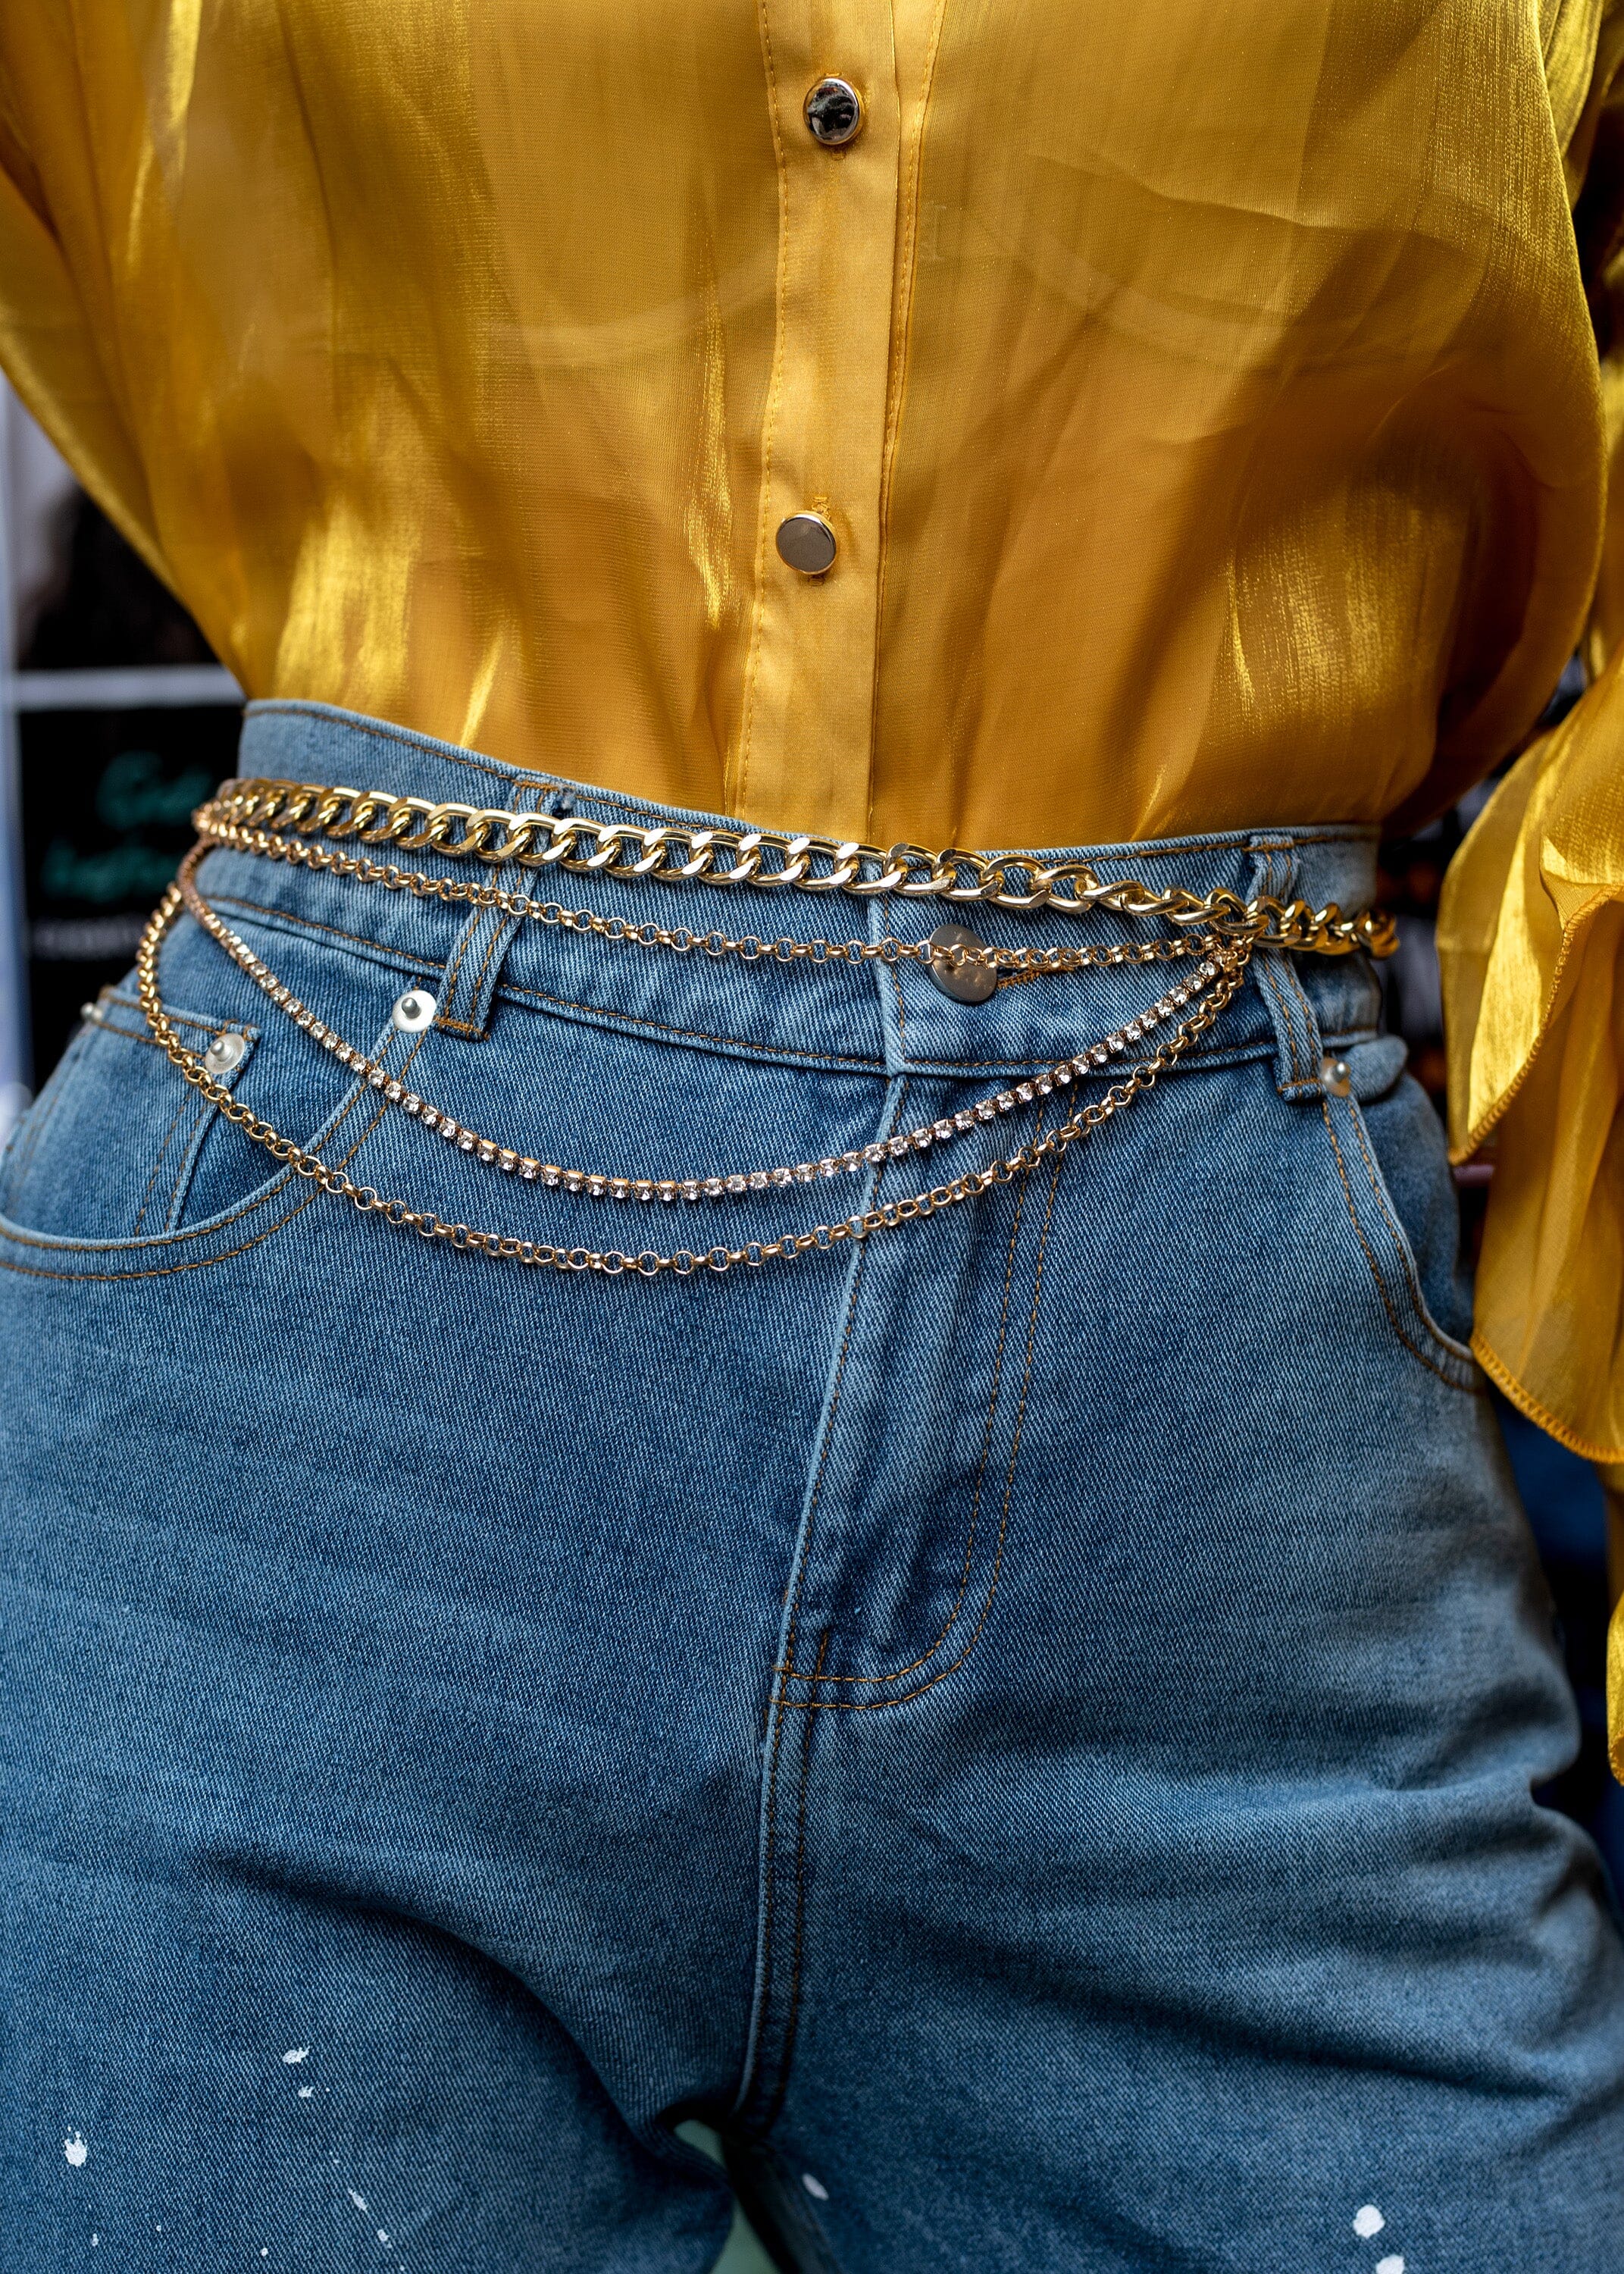 How to Wear a Concho Belt: From Jeans to Skirts and Beyond - Bellatory